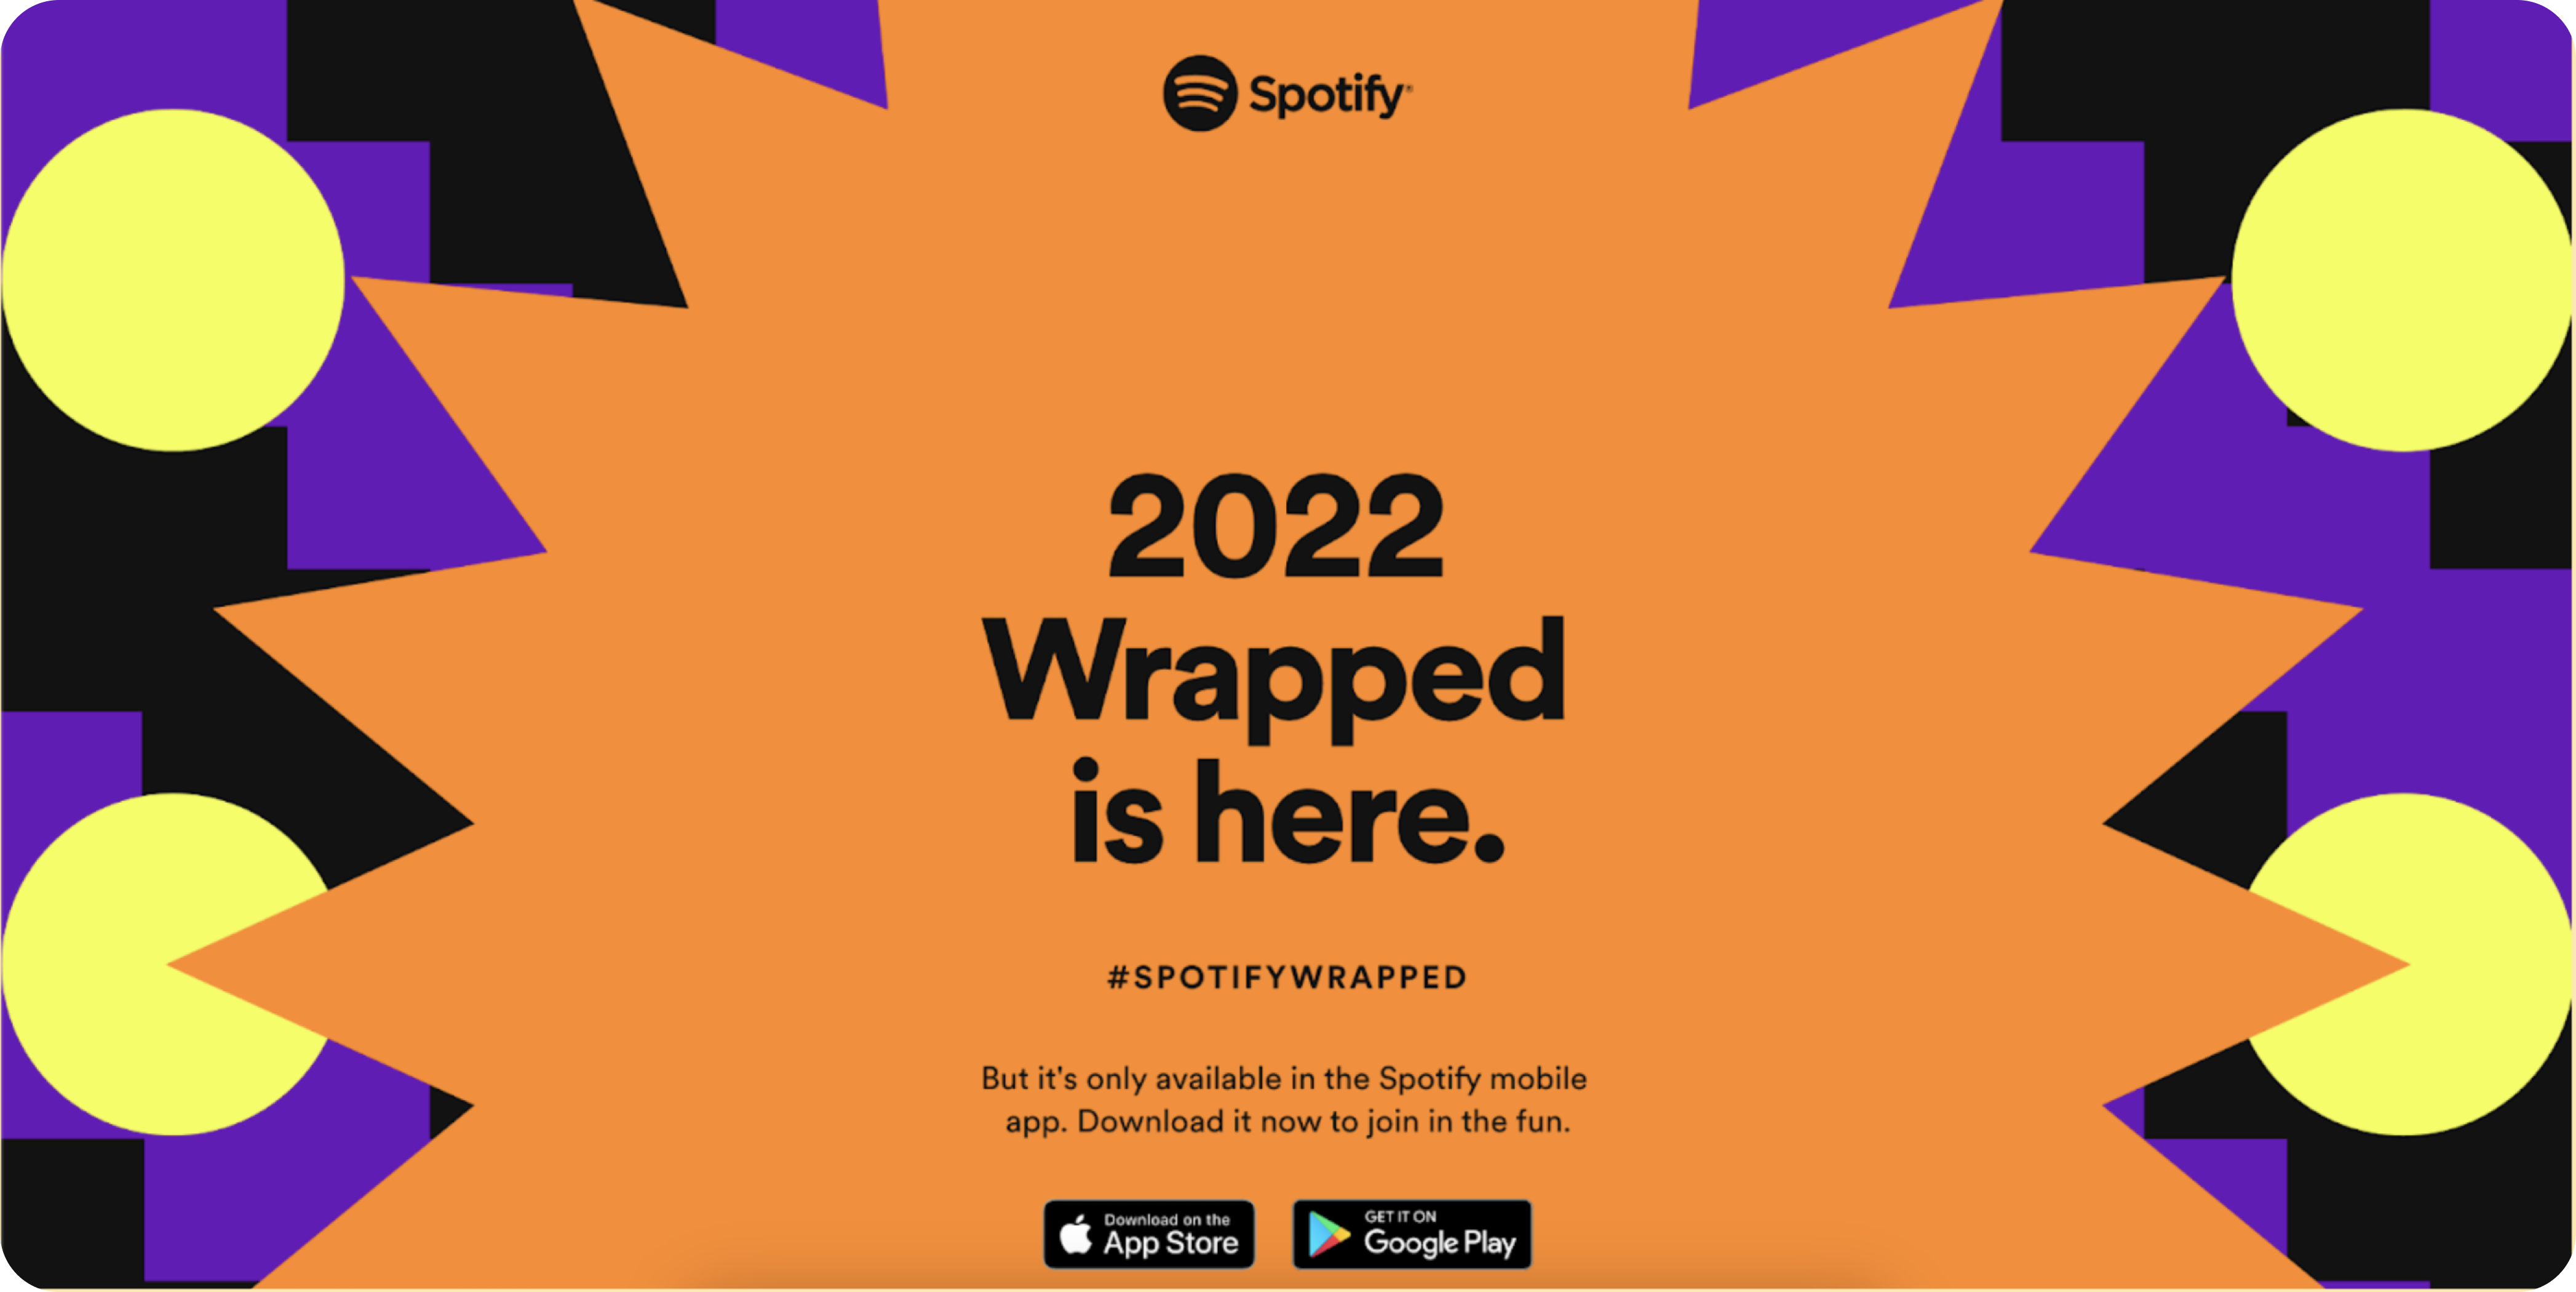 A Spotify poster announcing 2022 Wrapped is here.